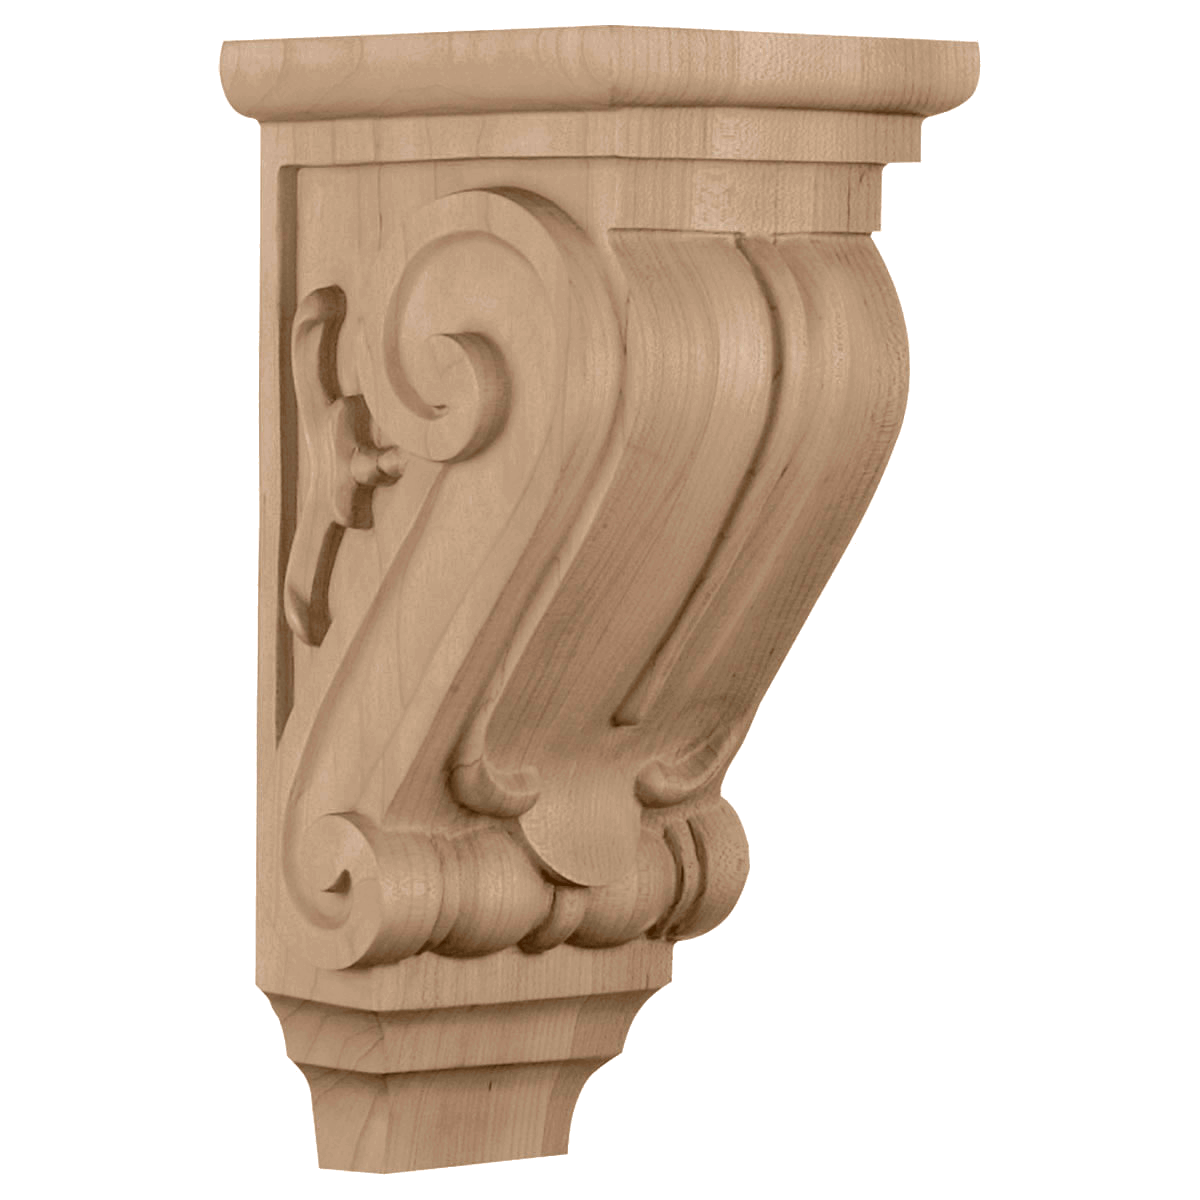 CORCL2 small classical corbel